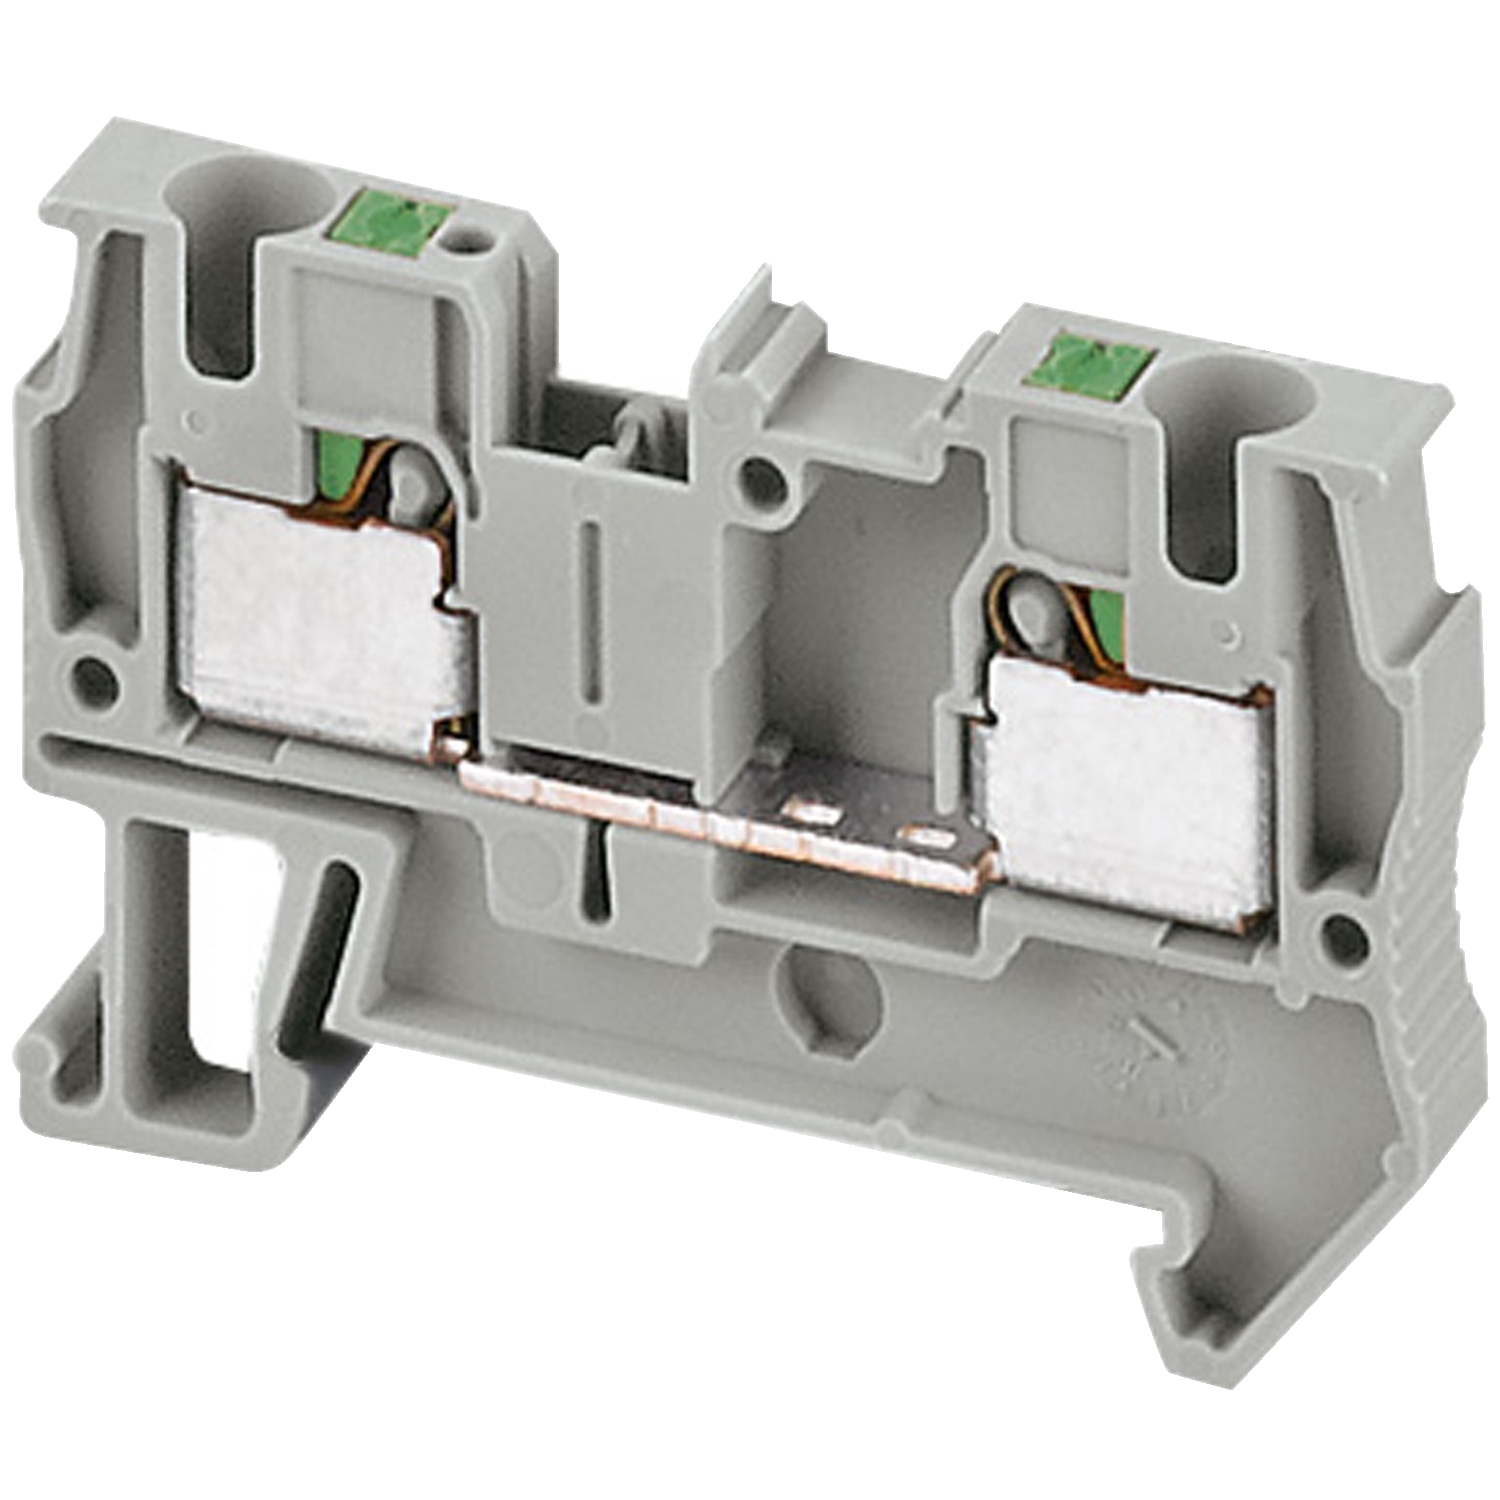 Terminal block, Linergy TR, push-in type, feed through, 2 points, 4mm², grey, set of 50